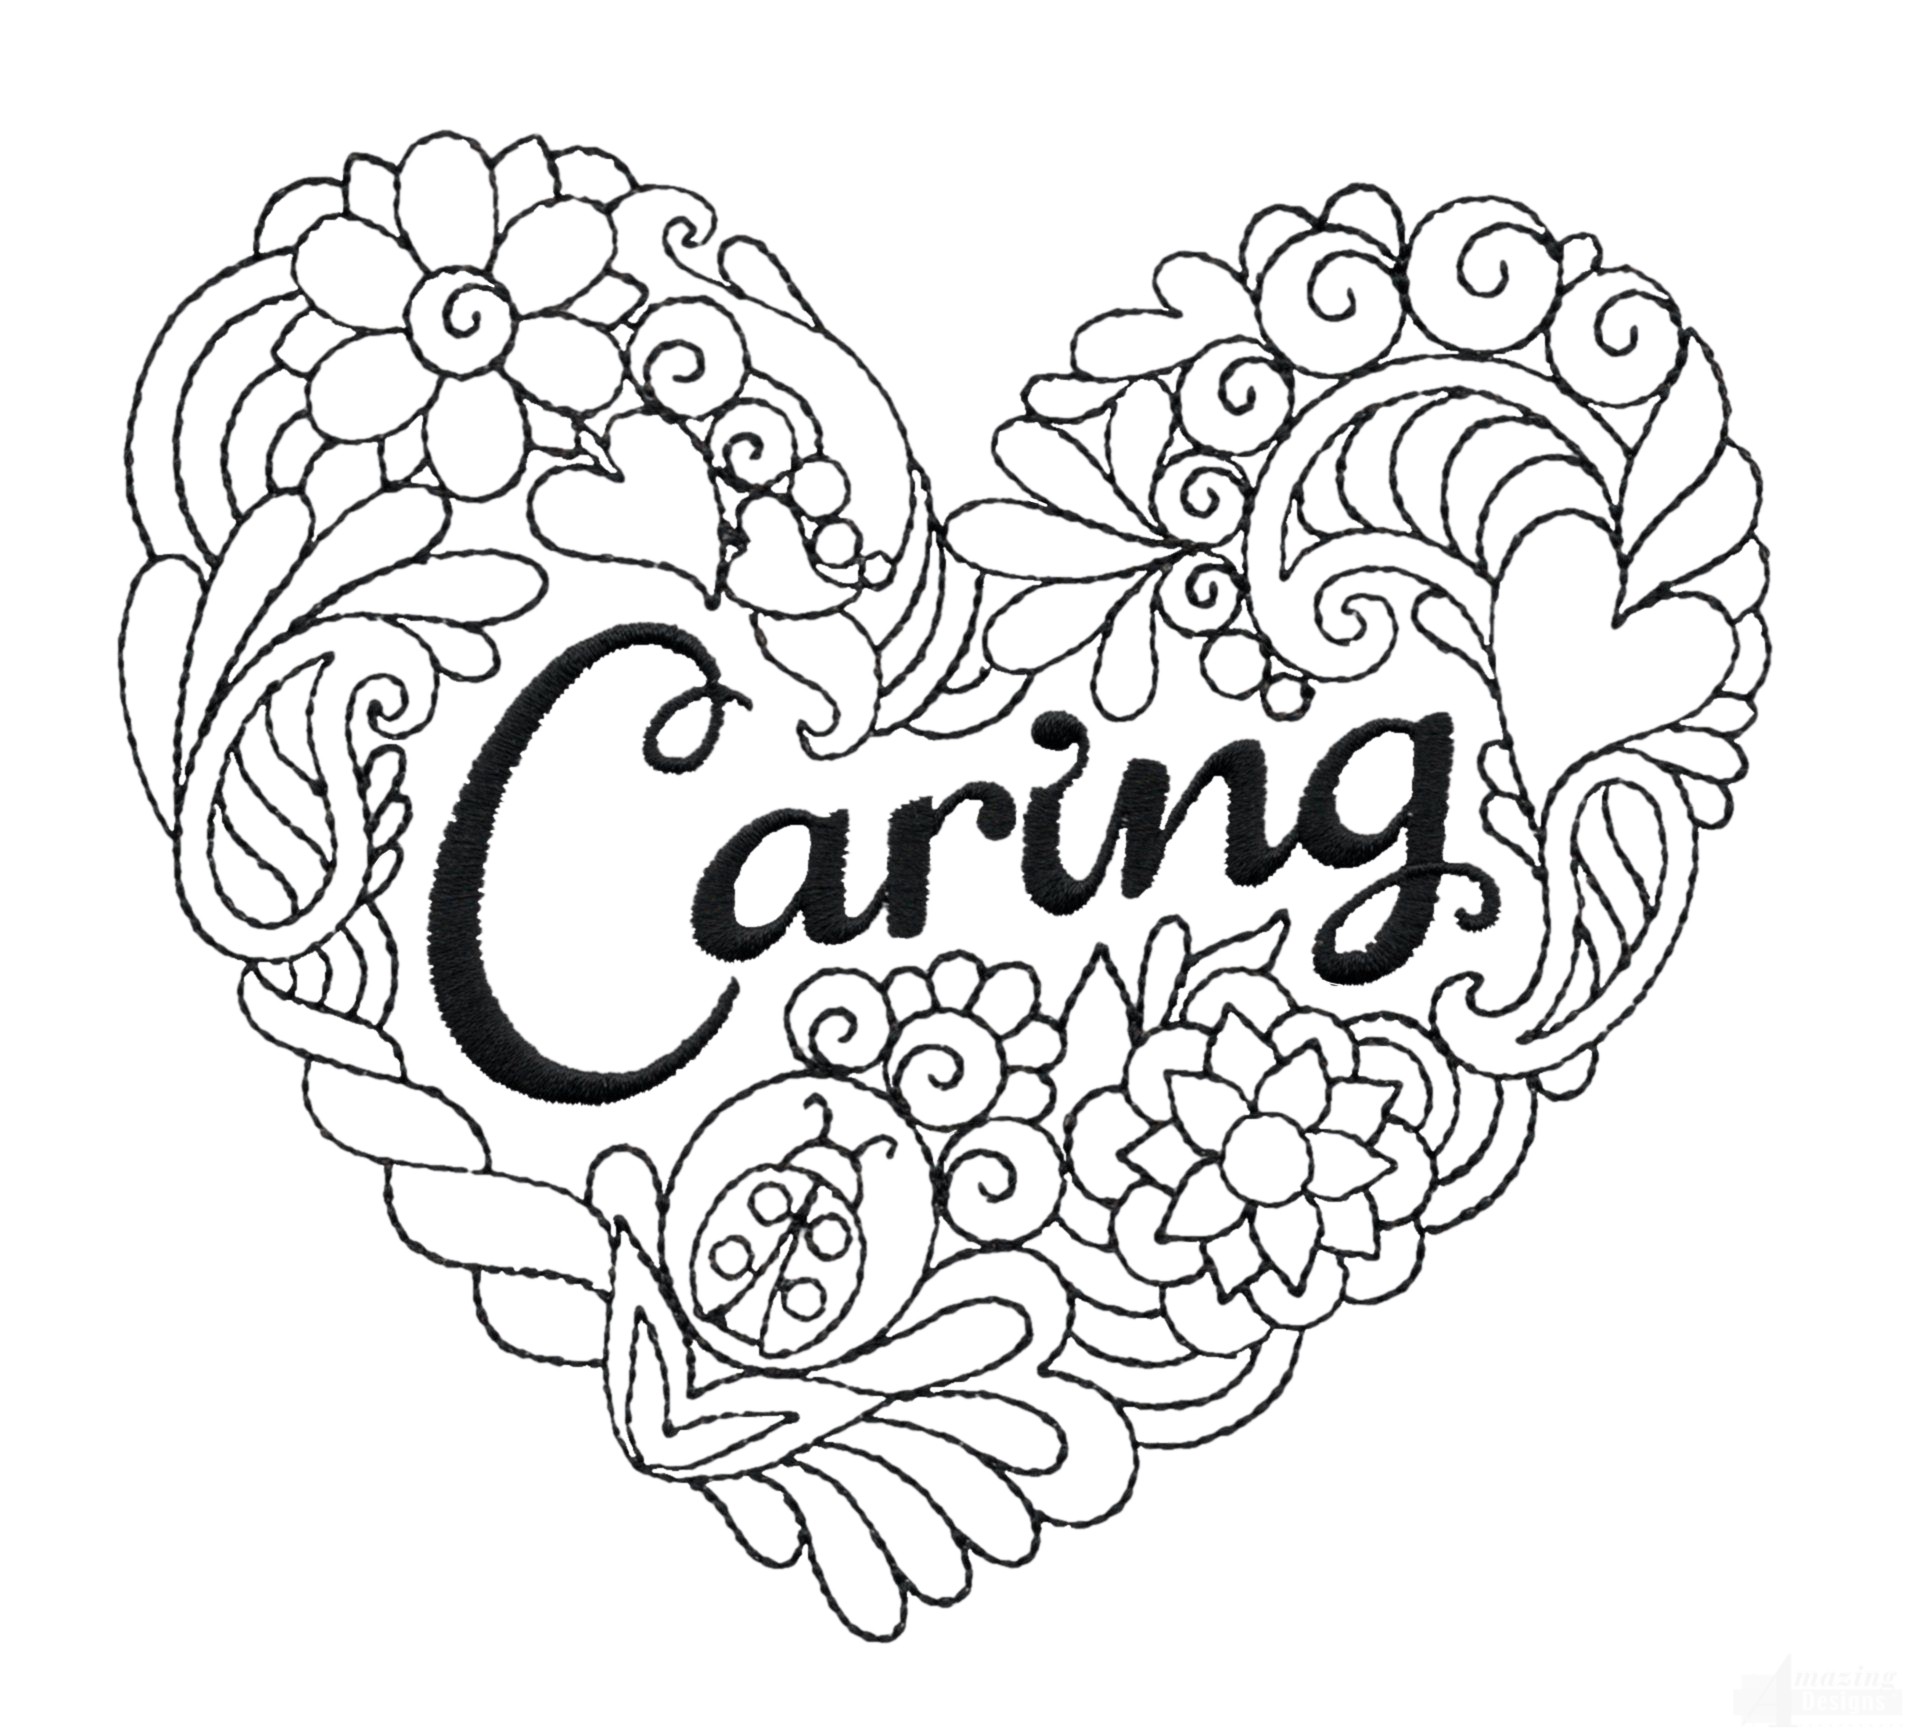 The best free Caring drawing images. Download from 58 free drawings of